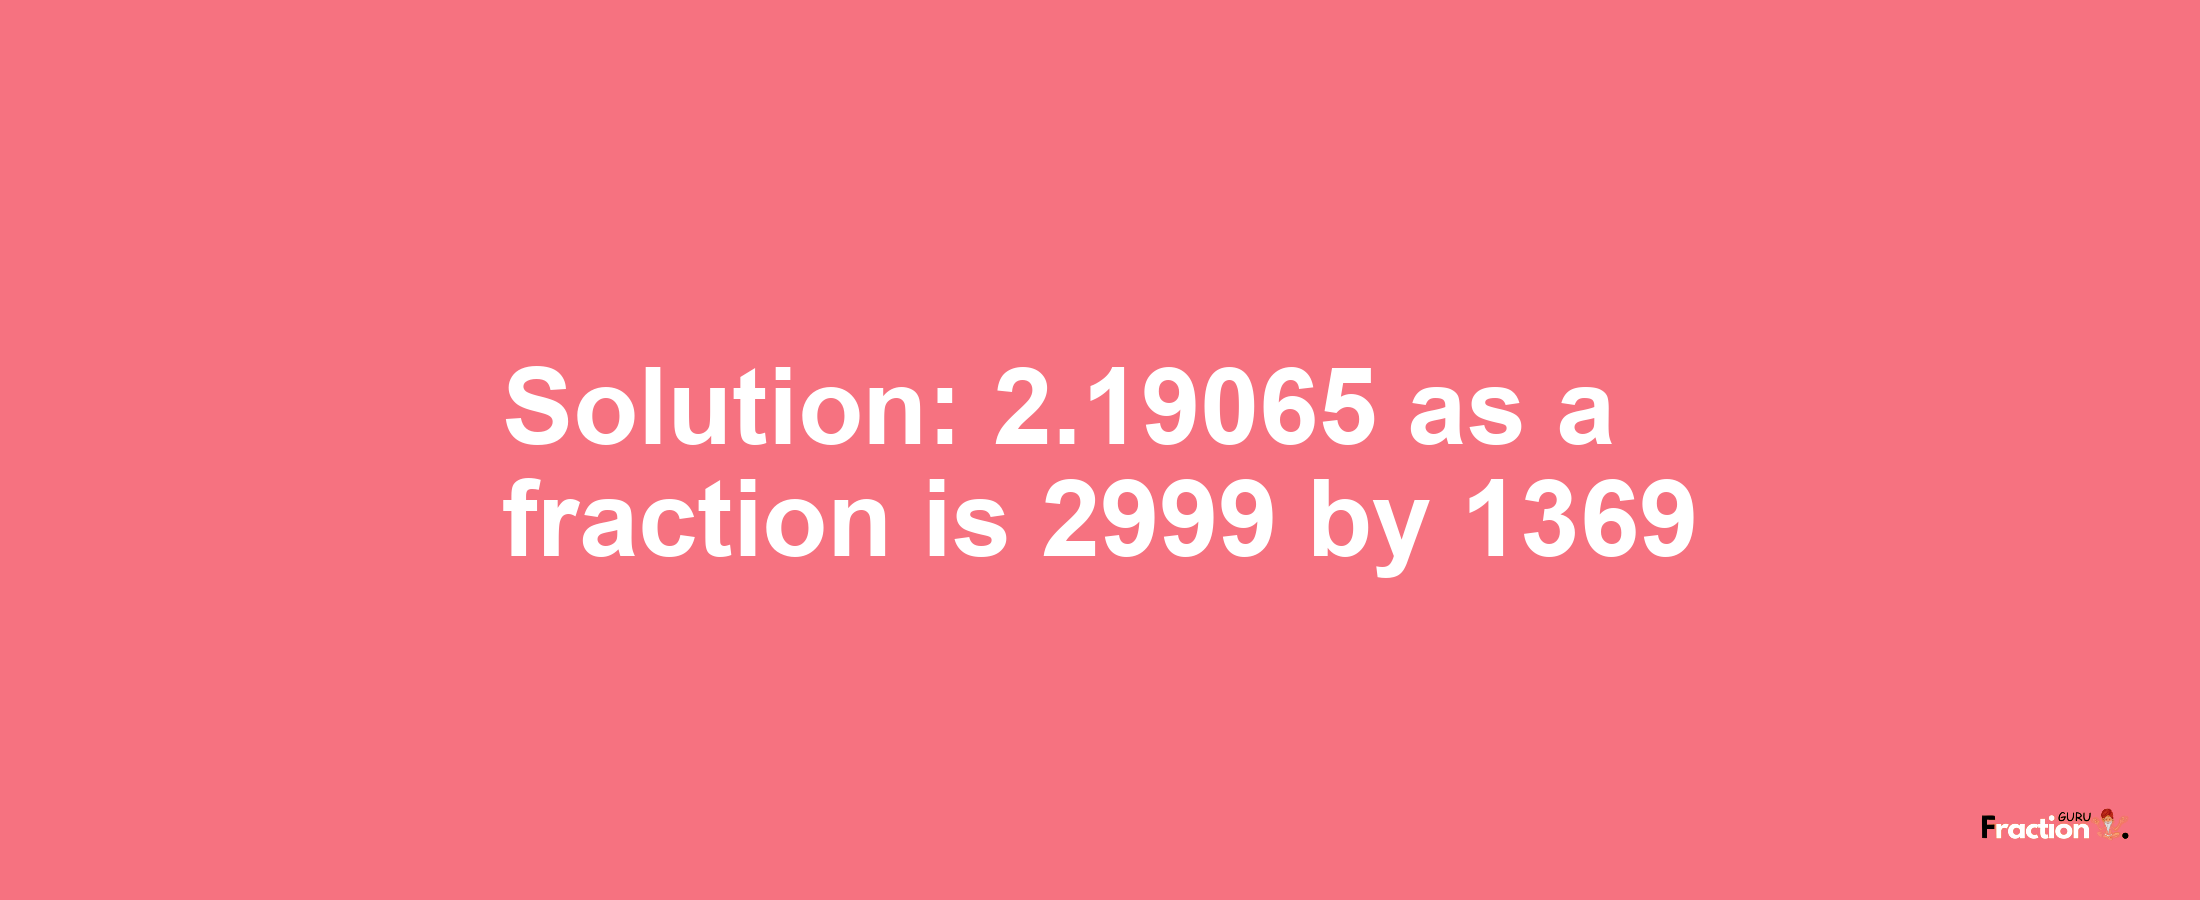 Solution:2.19065 as a fraction is 2999/1369